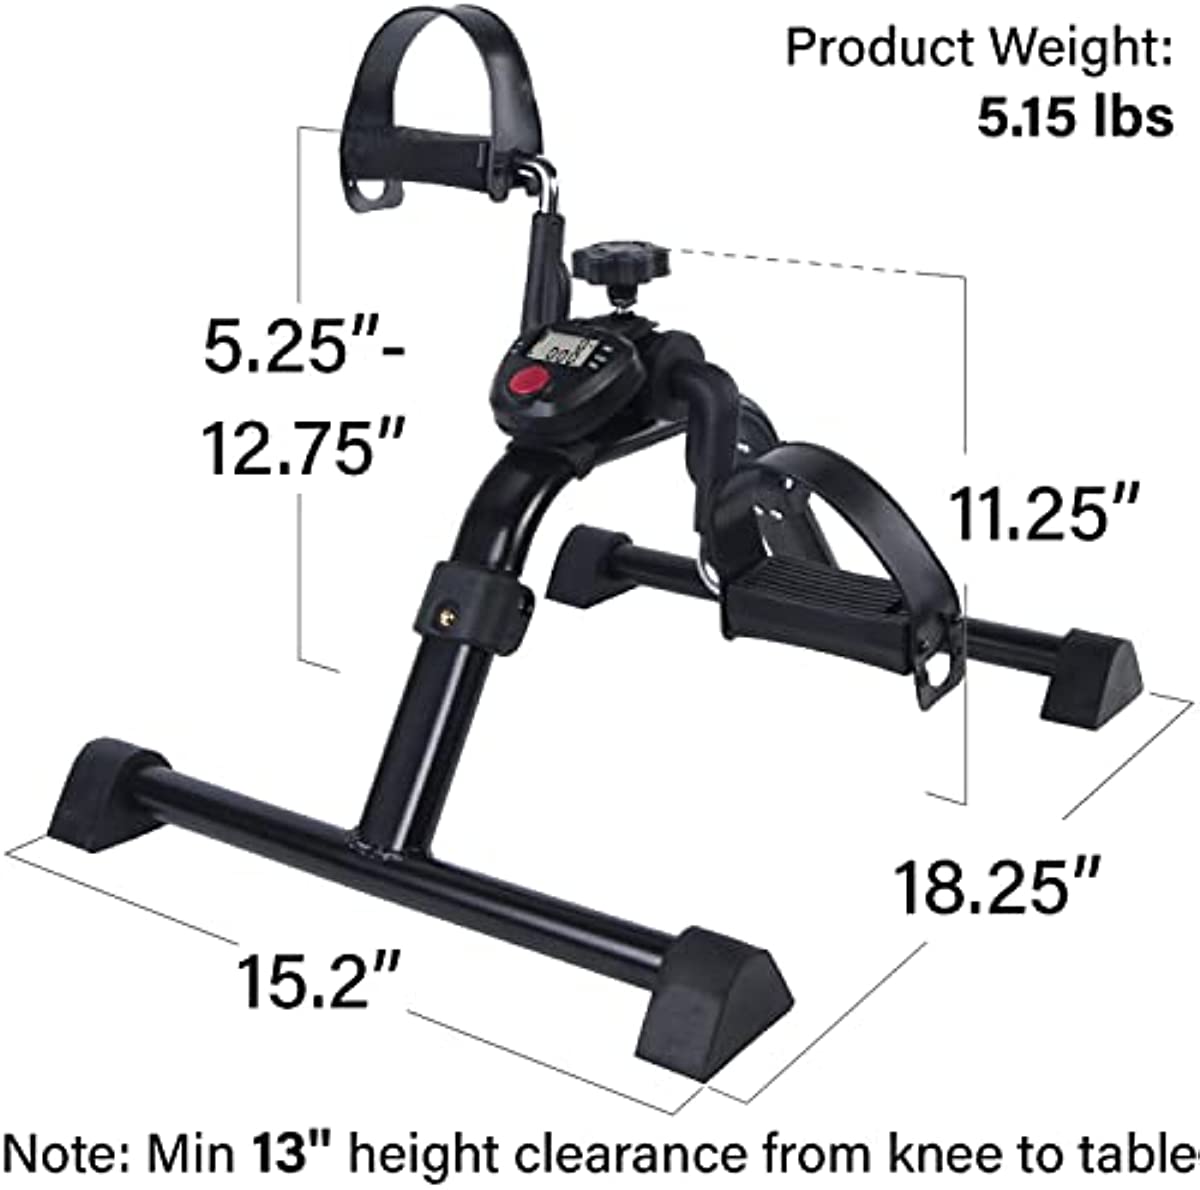 Vaunn Medical Under Desk Bike Pedal Exerciser with Electronic Display for Legs and Arms Workout (Fully Assembled Folding Exercise Pedaler, no Tools Required)